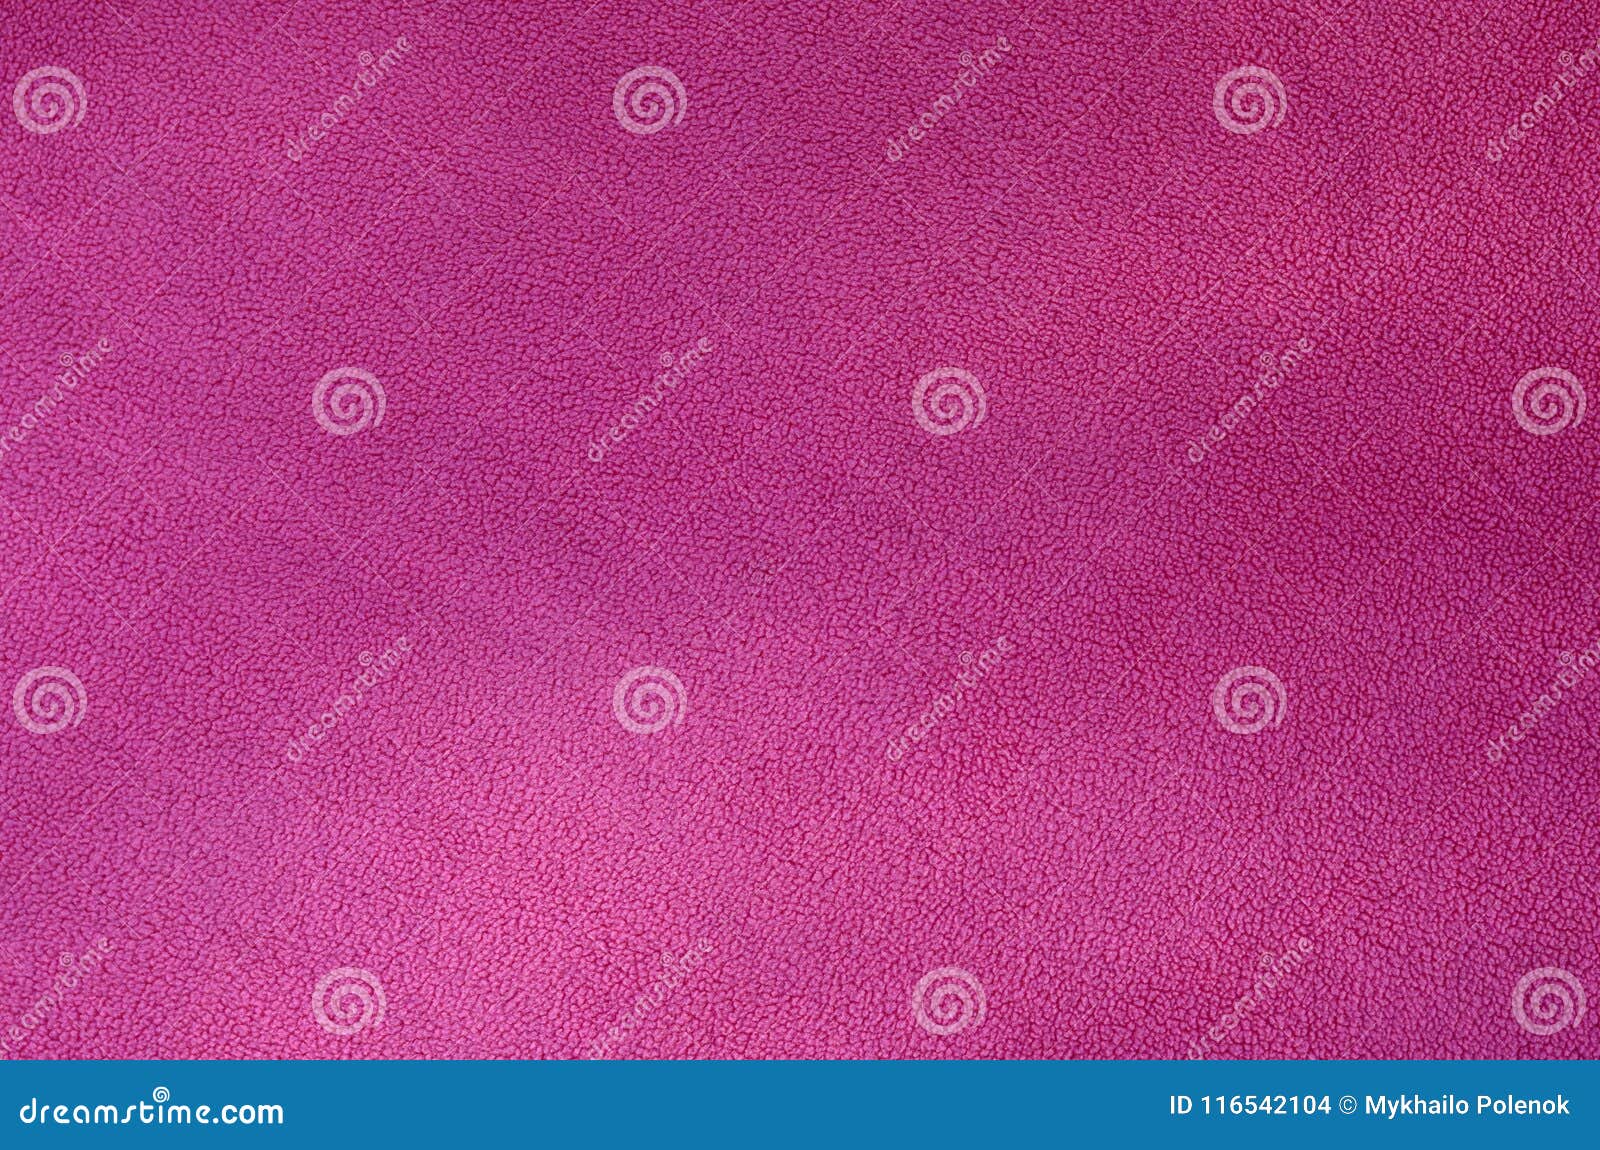 the blanket of furry pink fleece fabric. a background texture of light pink soft plush fleece materia